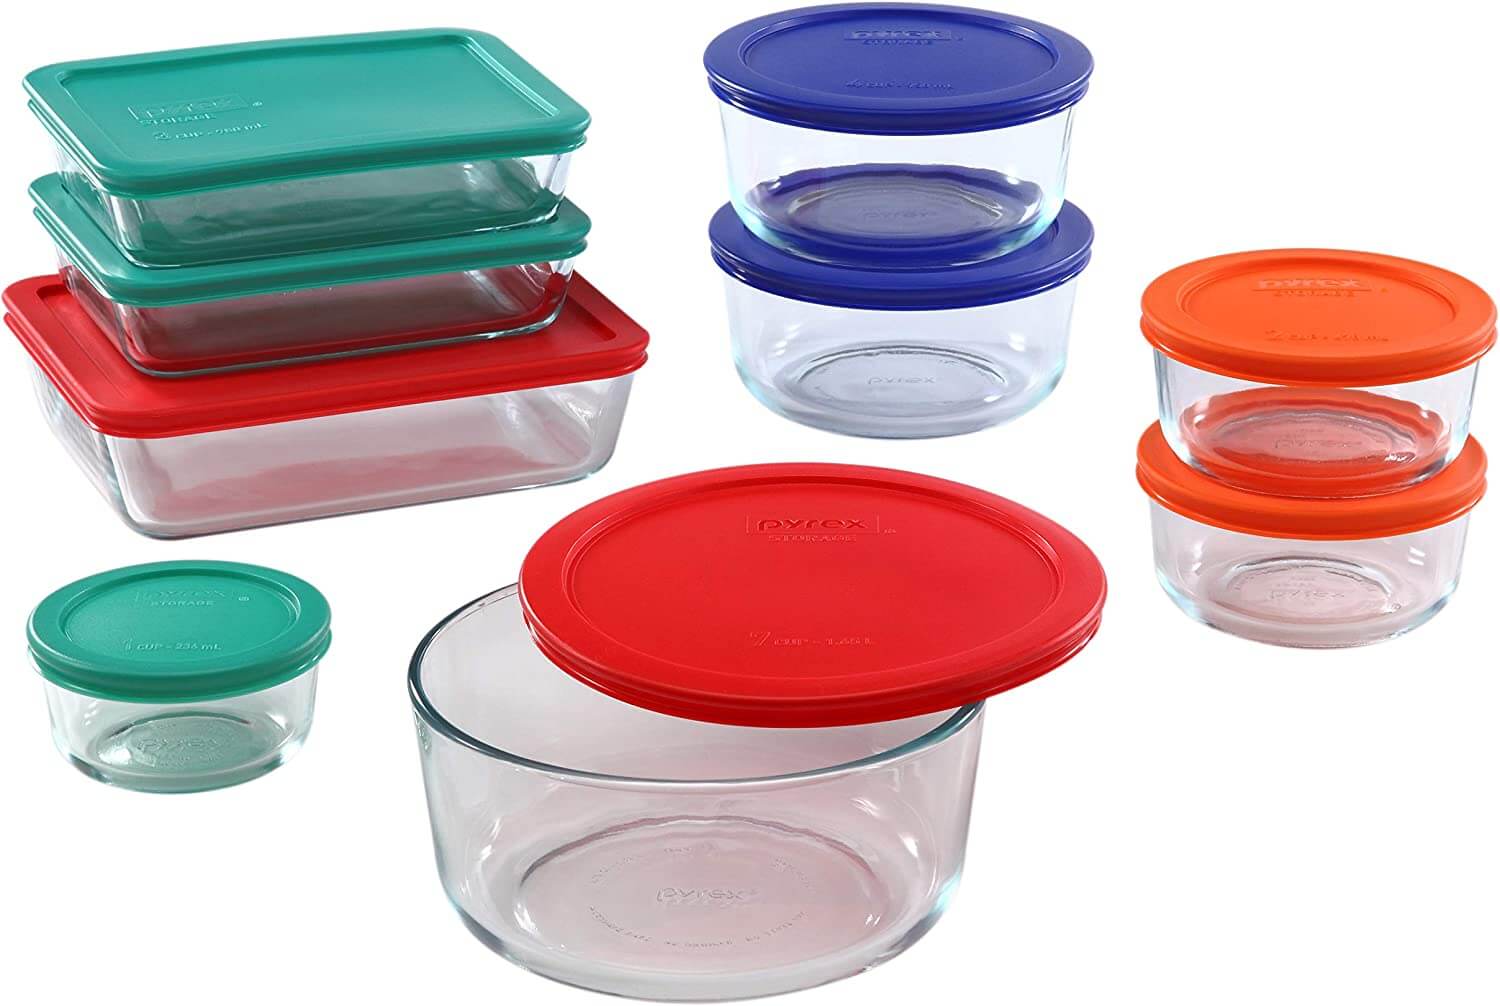 Pyrex Simply Store Meal Prep container set